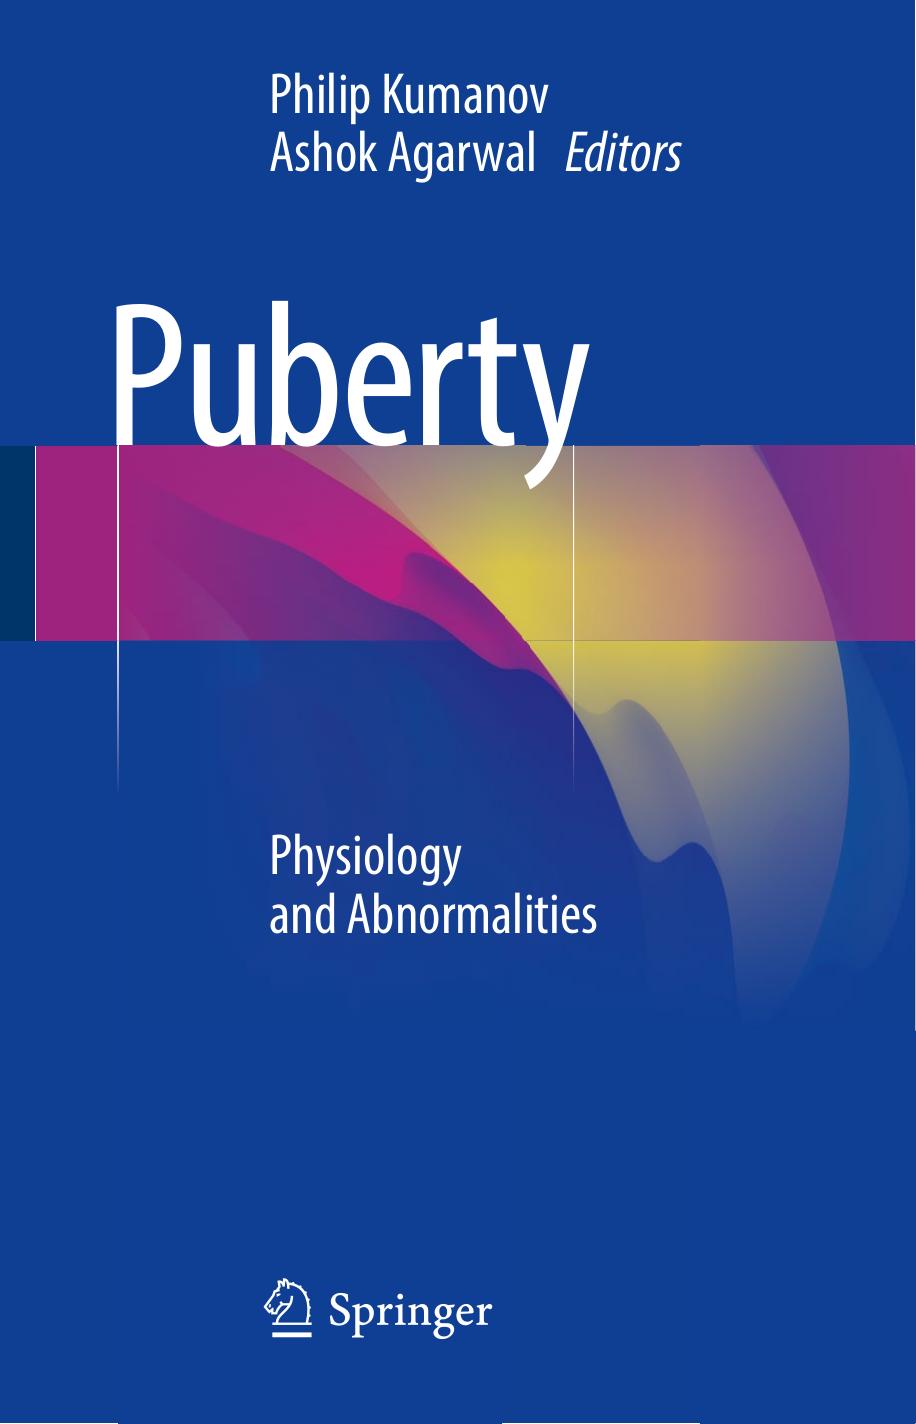 PUBERTY-PHYSIOLOGY AND ABNORMALITY